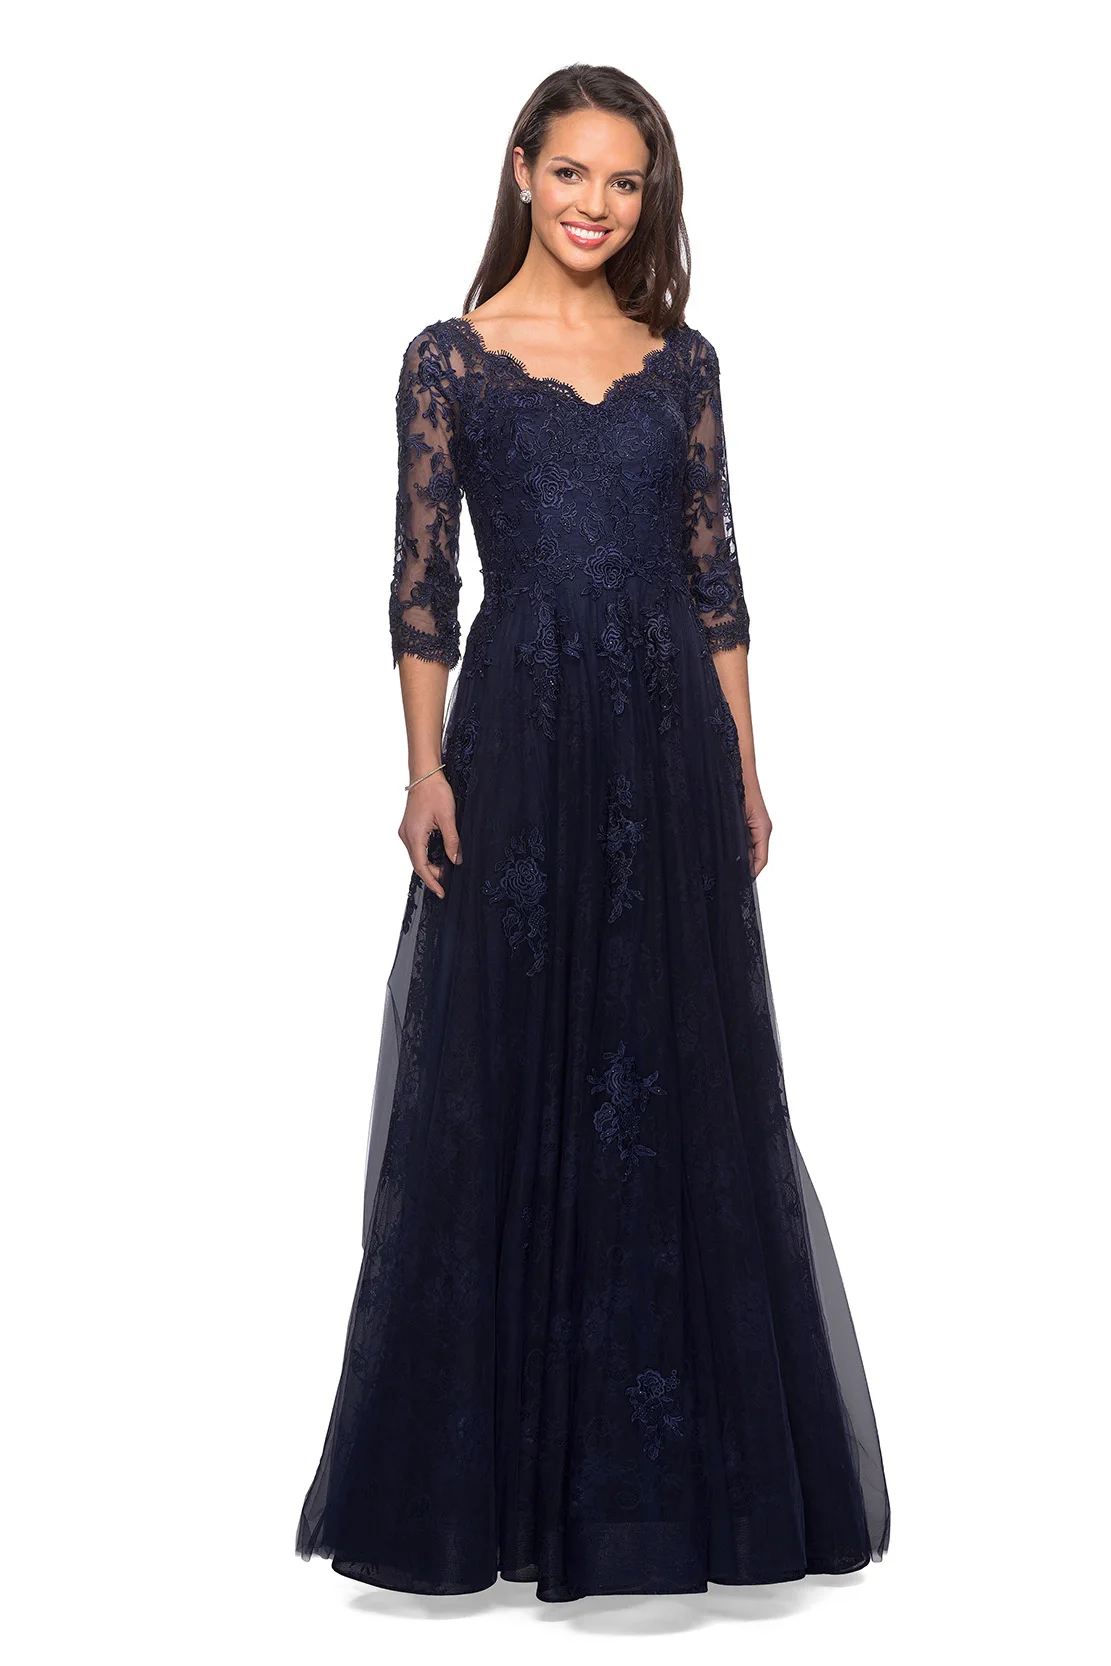 

Lover Kiss Elegant Navy Blue Lace Mother of the Bride Dresses 2022 Latest V Neckline W/ 3/4 Sleeves Wedding Guest Gowns On Sale